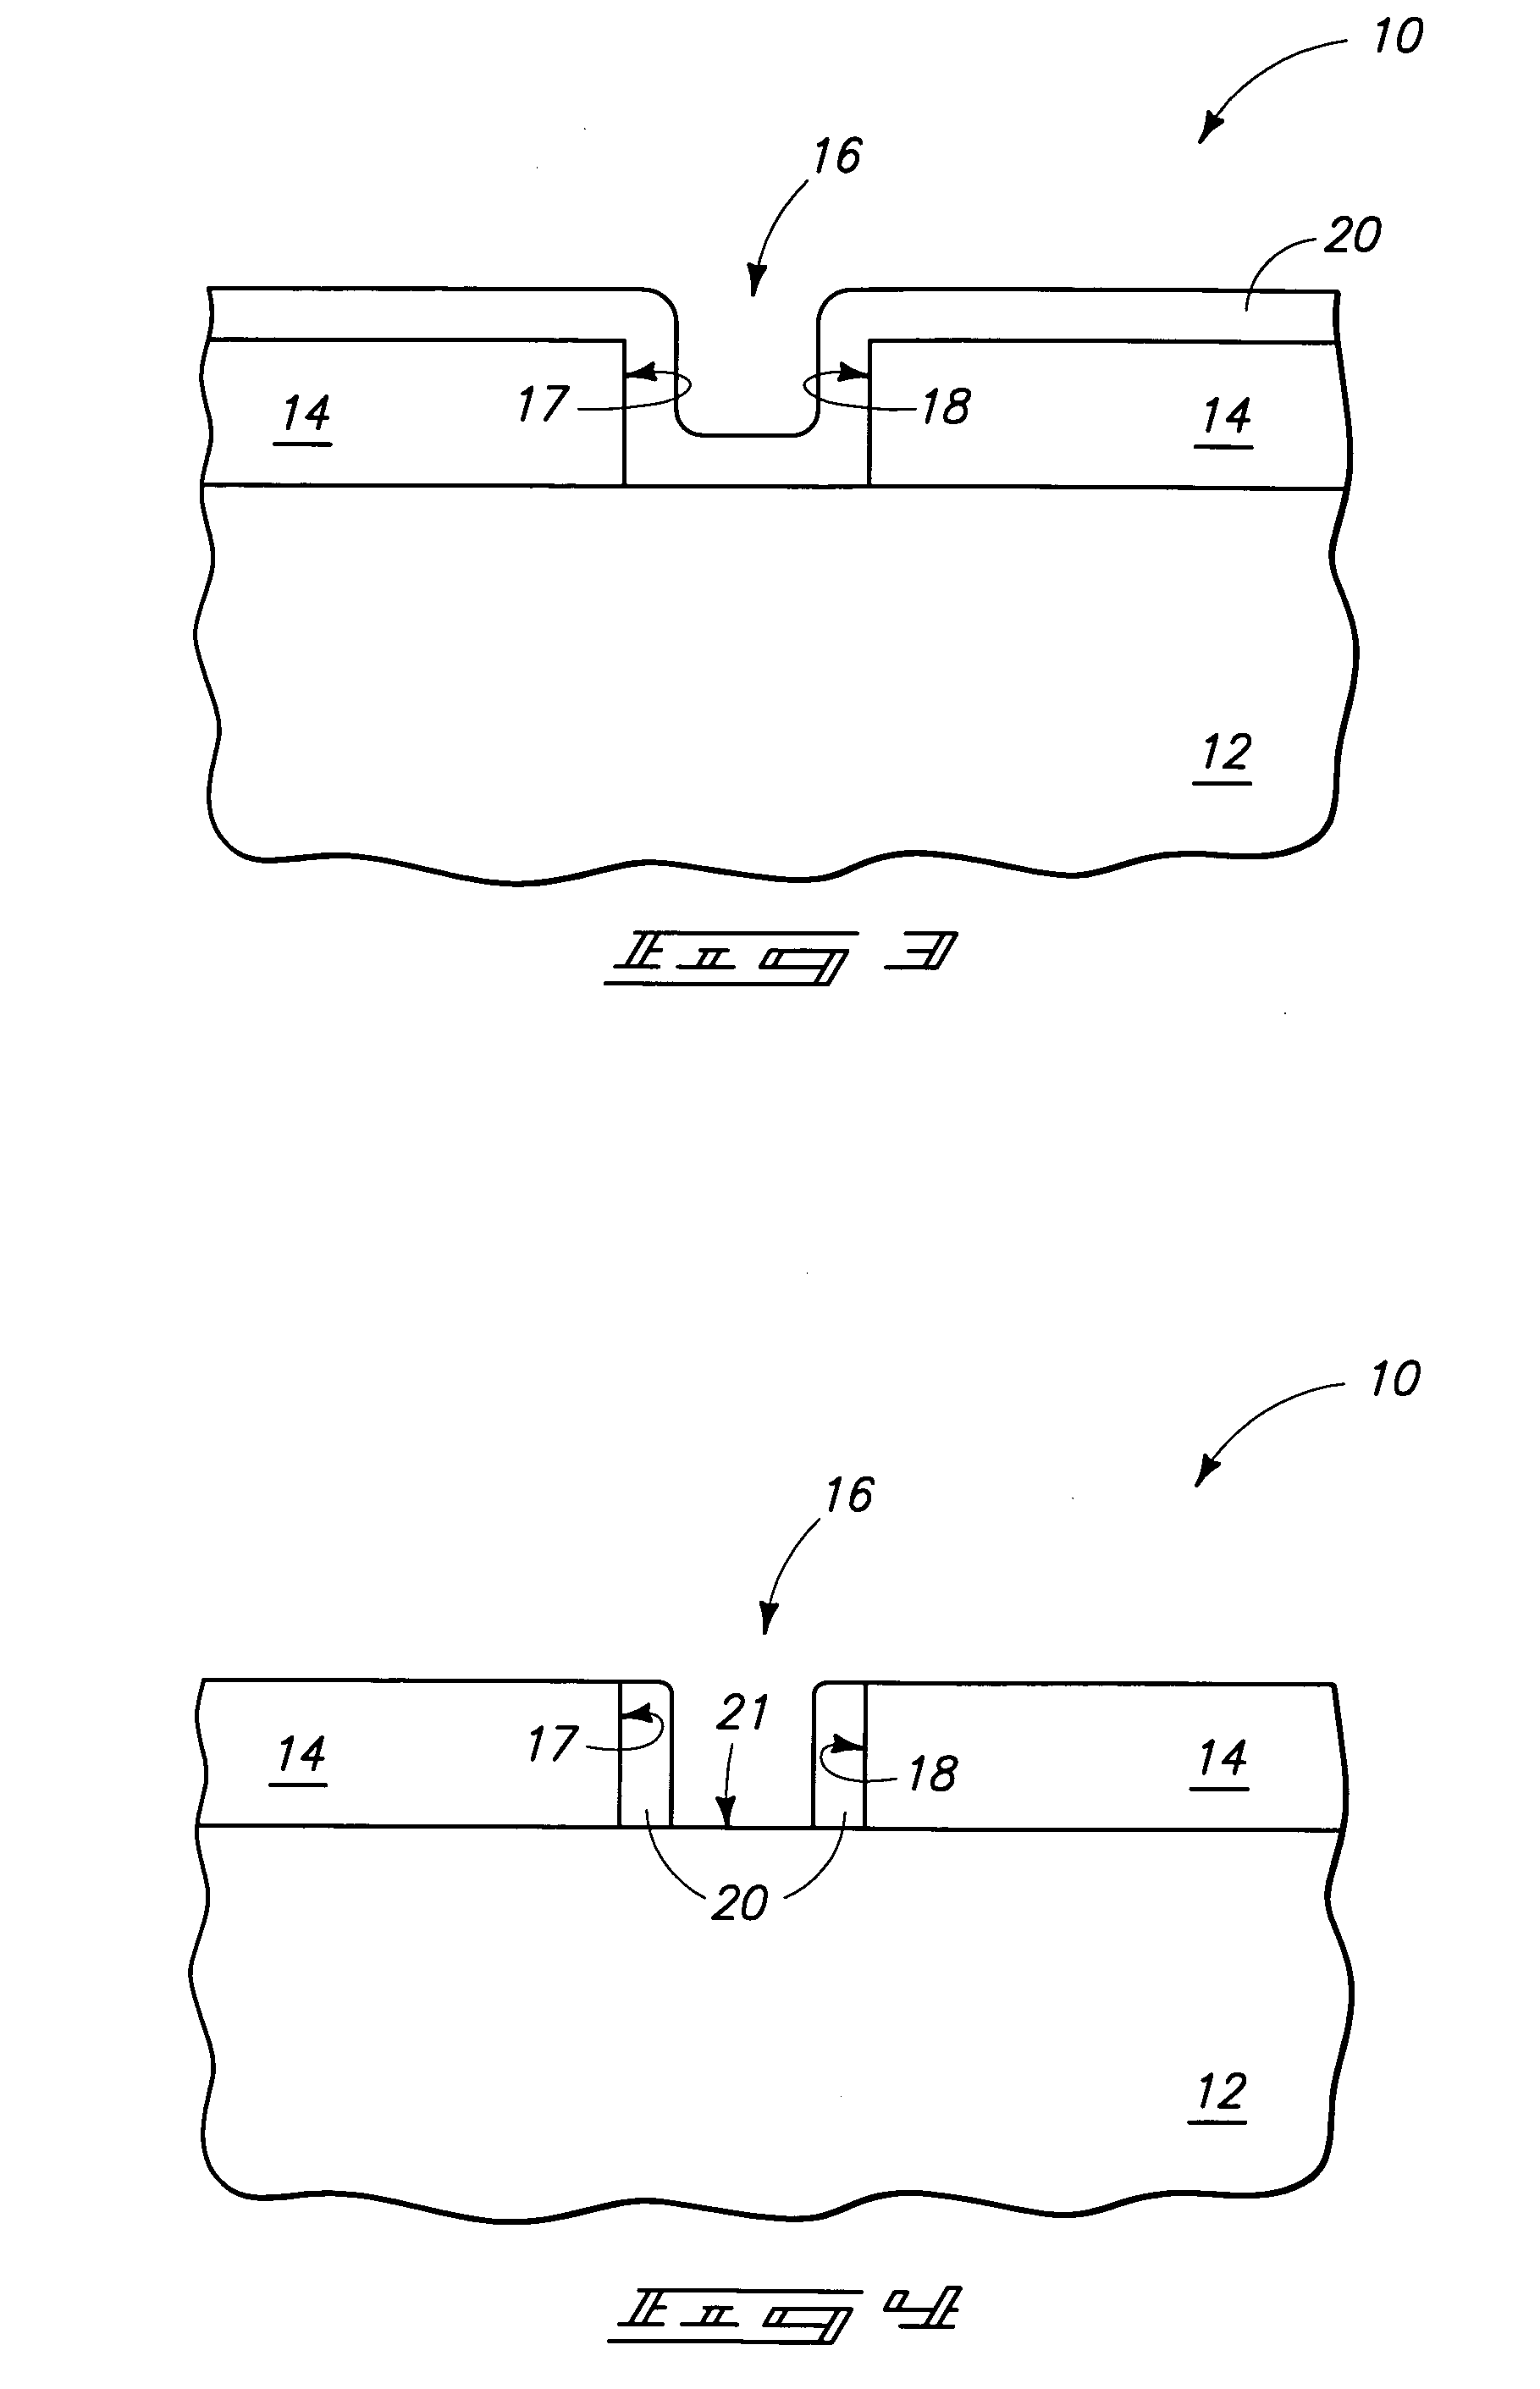 Methods of forming layers comprising epitaxial silicon